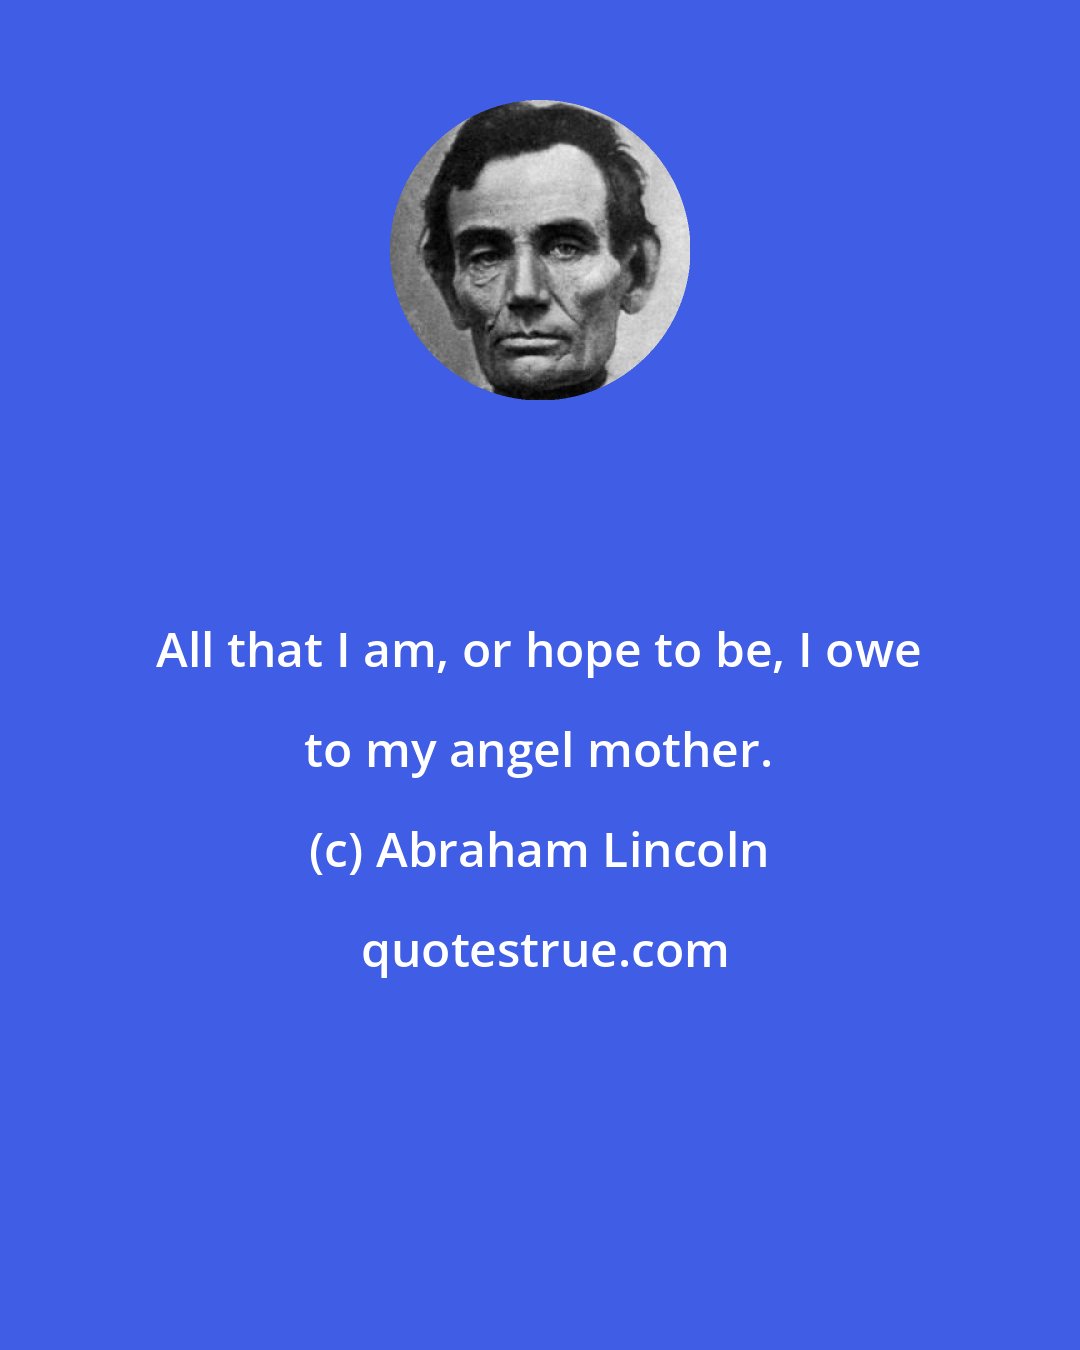 Abraham Lincoln: All that I am, or hope to be, I owe to my angel mother.